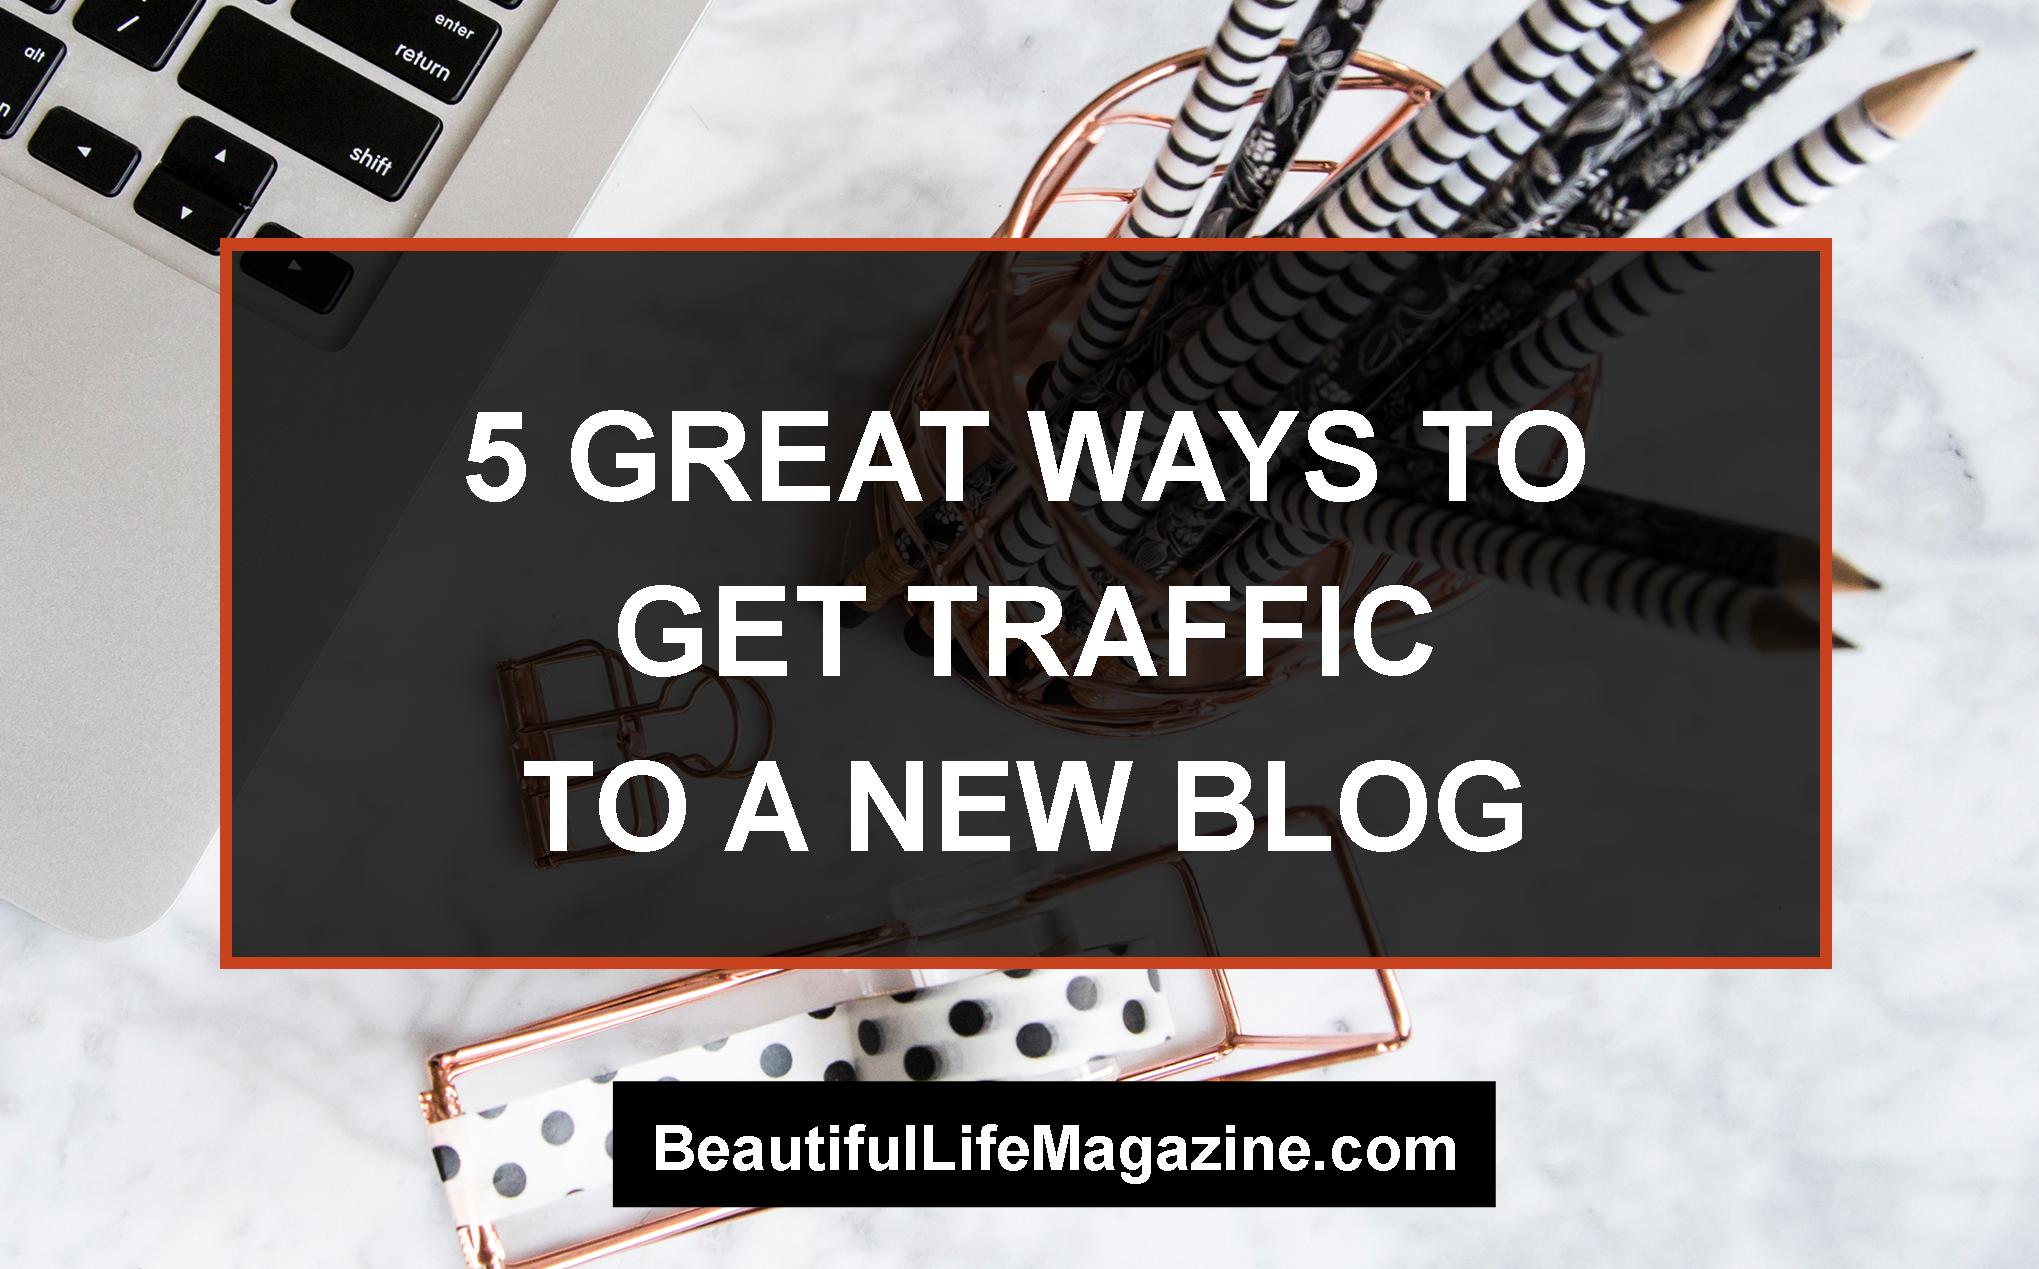 Though there are many ways to Get Traffic to A New Blog, the most important factor is NETWORK. The more network you have the more traffic you’ll get.